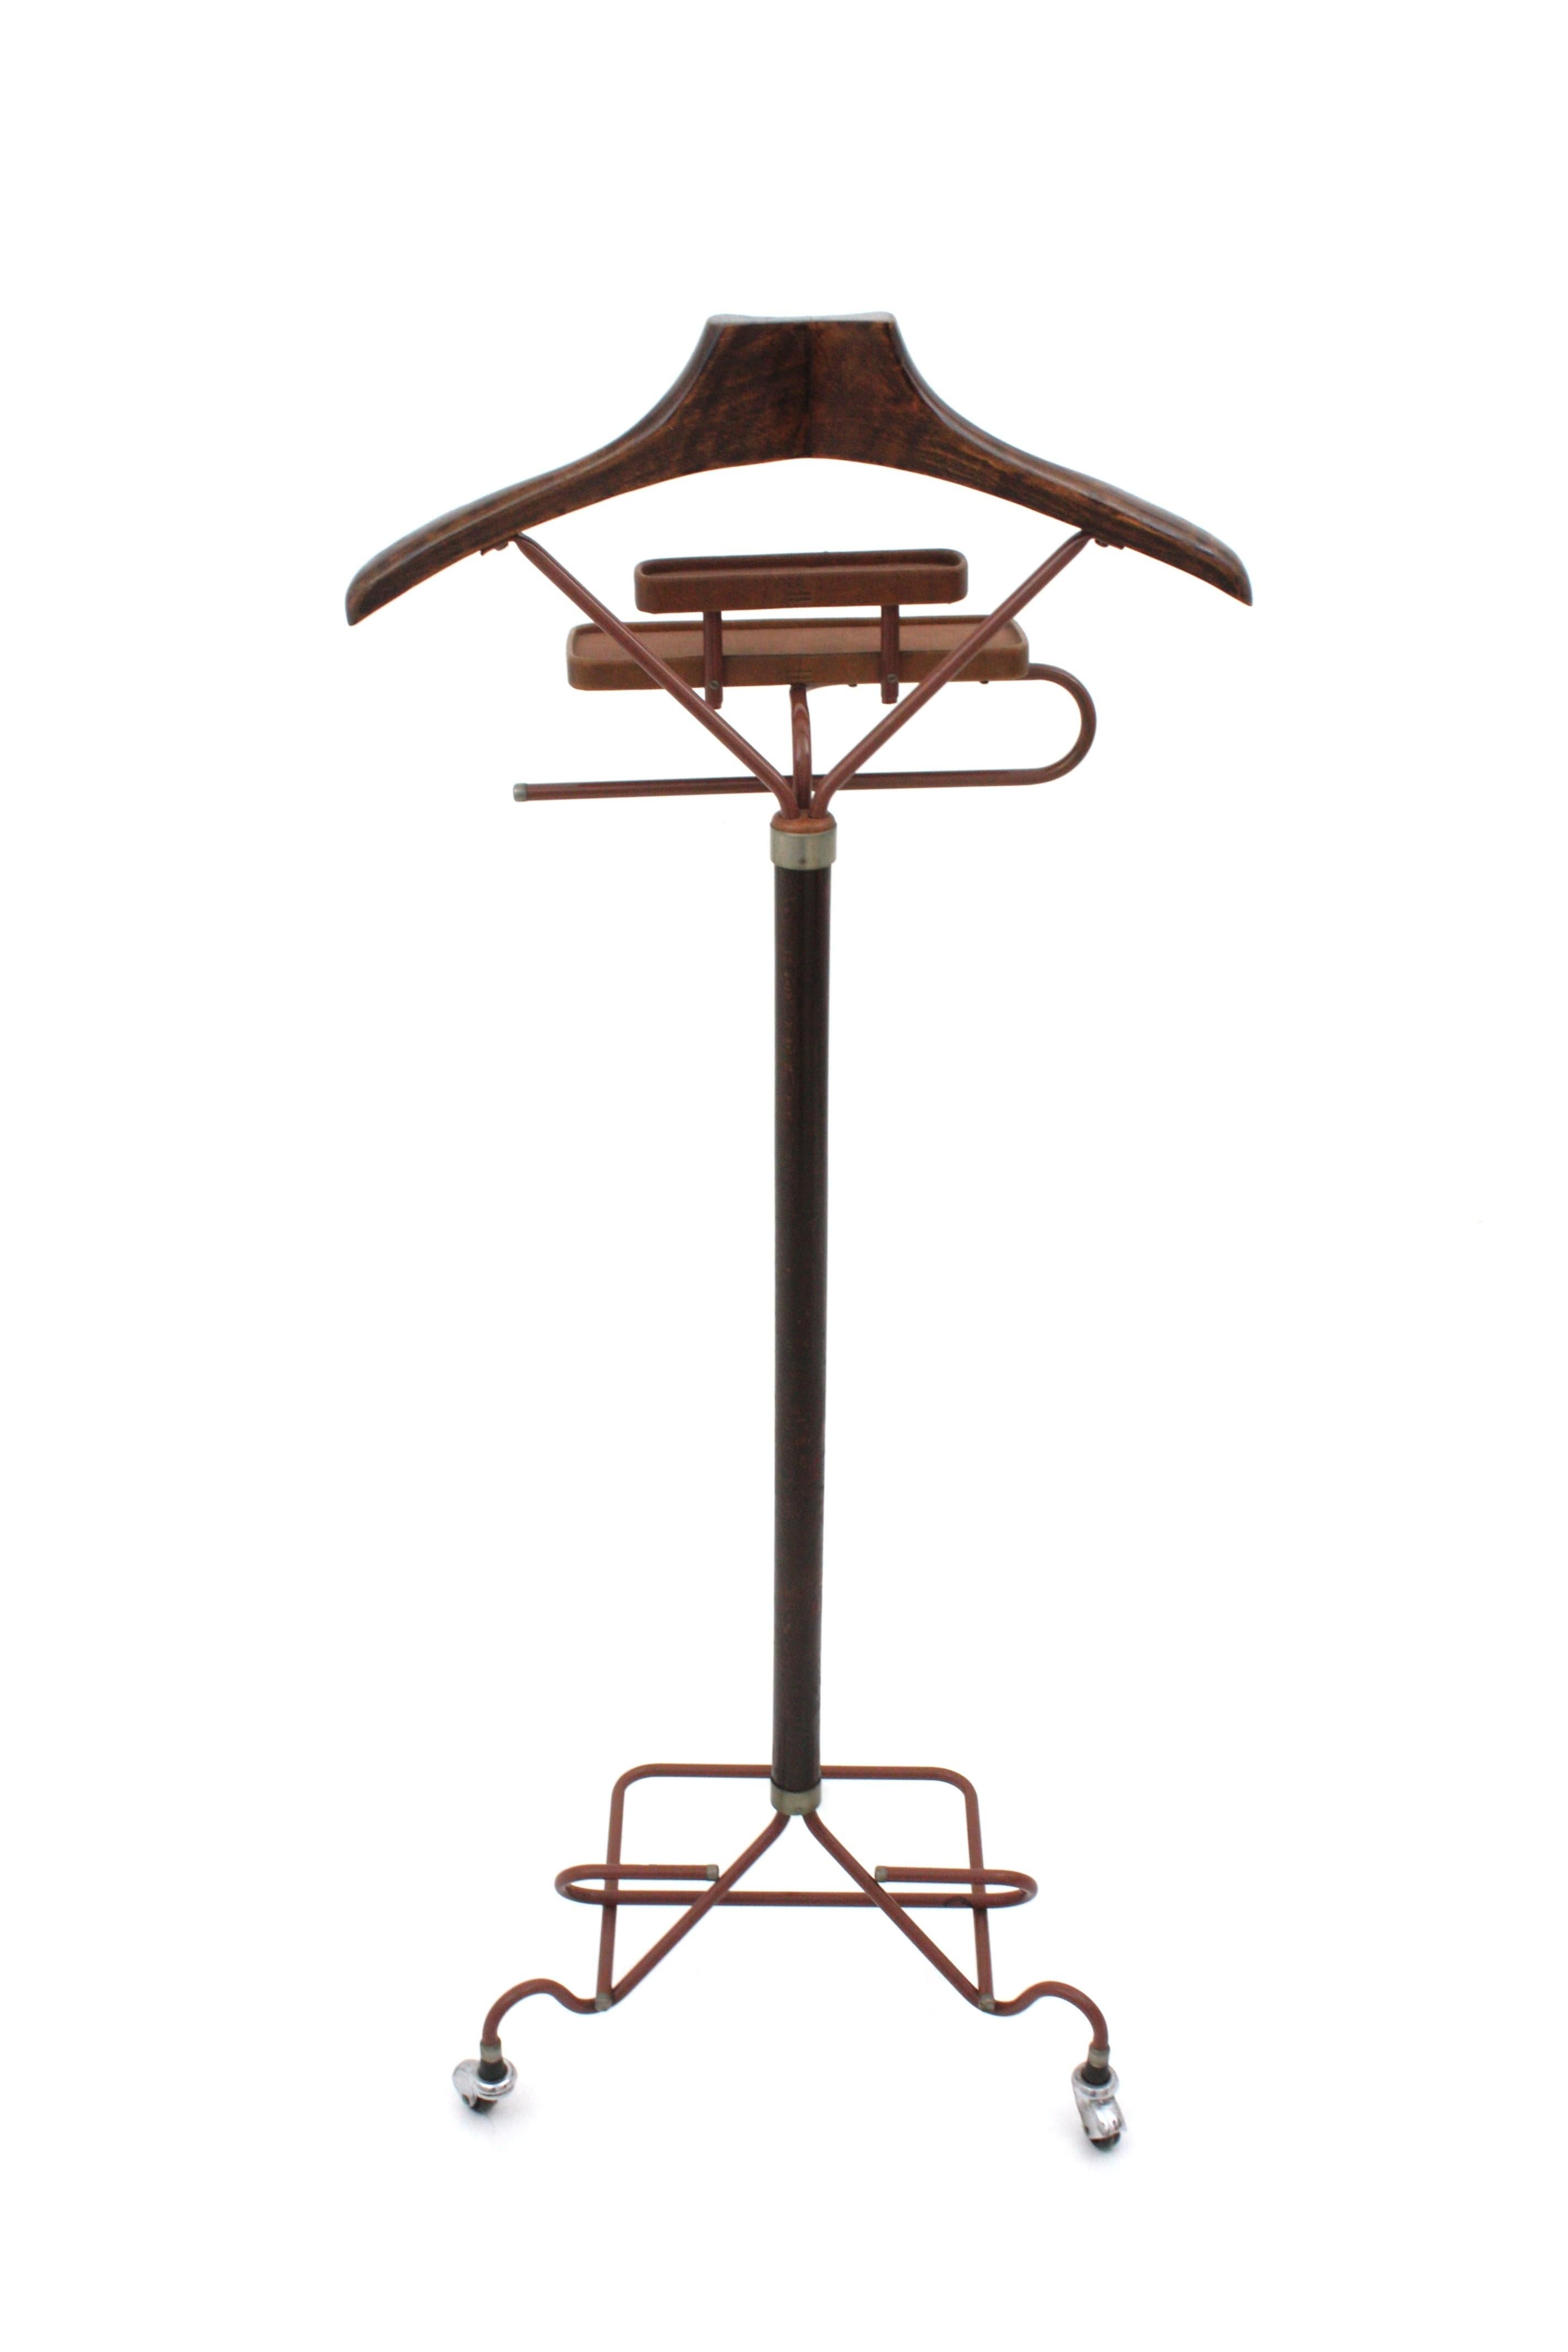 Italian Beech Wood and Acrylic Valet Stand Dressboy, 1960s For Sale 6